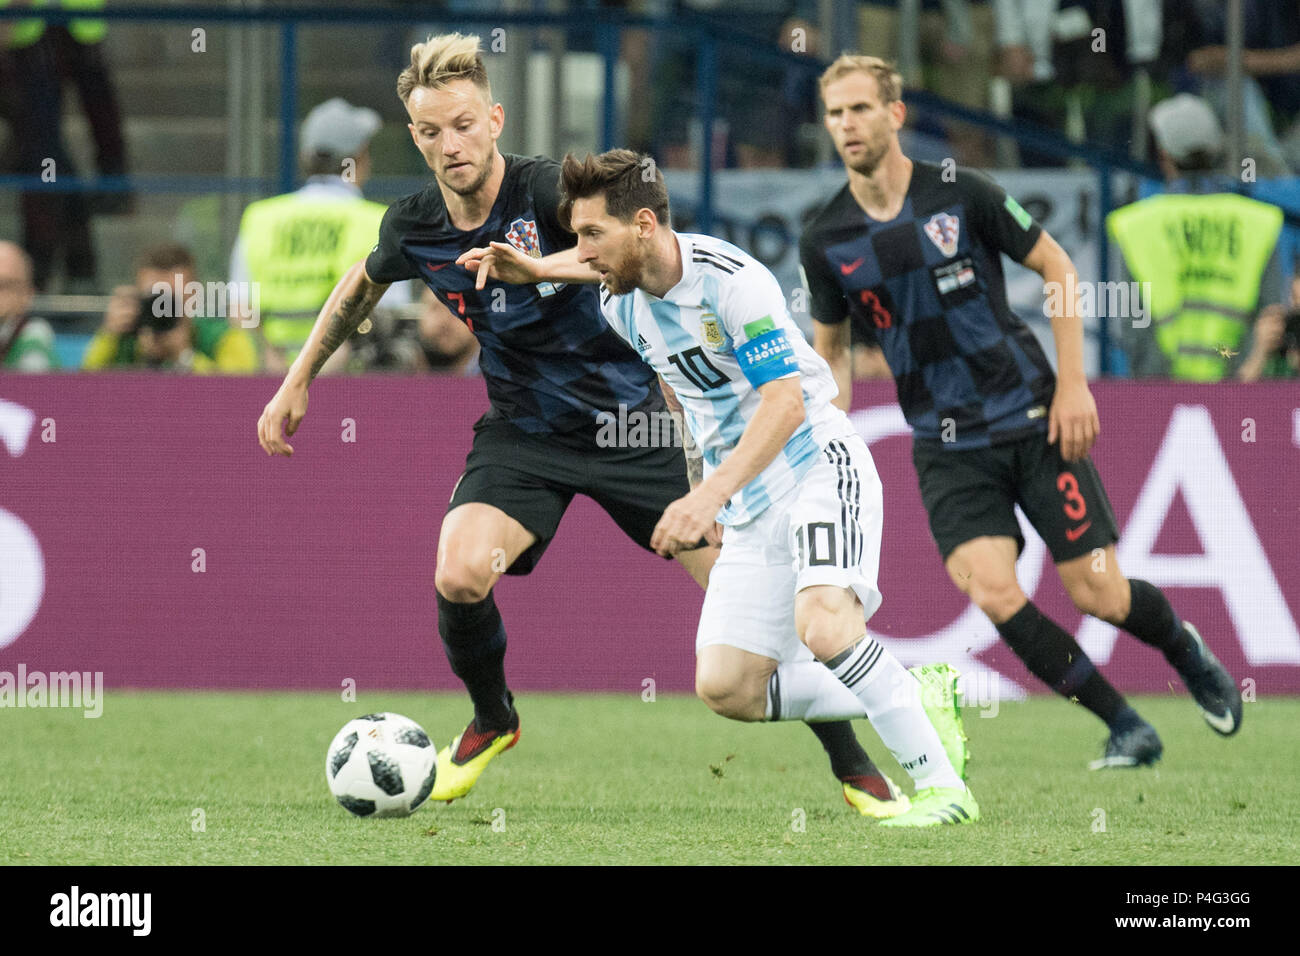 Nizhny Novgorod, Russia. 21 June 2018.  Lionel MESSI (right, ARG) versus Ivan RAKITIC (CRO), action, duels, Argentina (ARG) - Croatia (CRO) 0: 3, preliminary round, Group D, match 23, on 21.06.2018 in Moscow; Football World Cup 2018 in Russia from 14.06. - 15.07.2018. | usage worldwide Credit: dpa/Alamy Live News Credit: dpa picture alliance/Alamy Live News Stock Photo